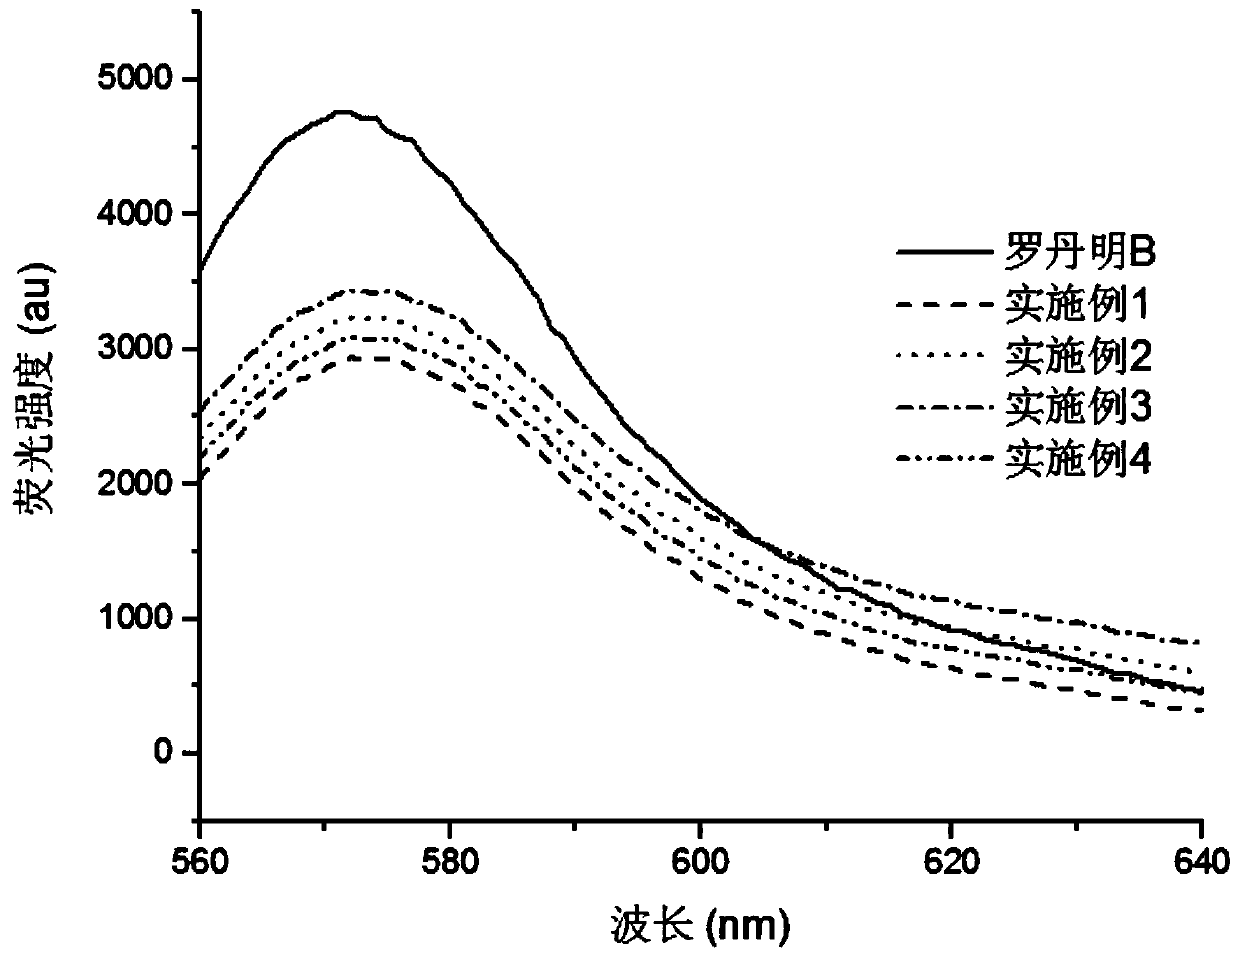 Preparation method and applications of fluorescently-labeled rice bran polysaccharide iron complex